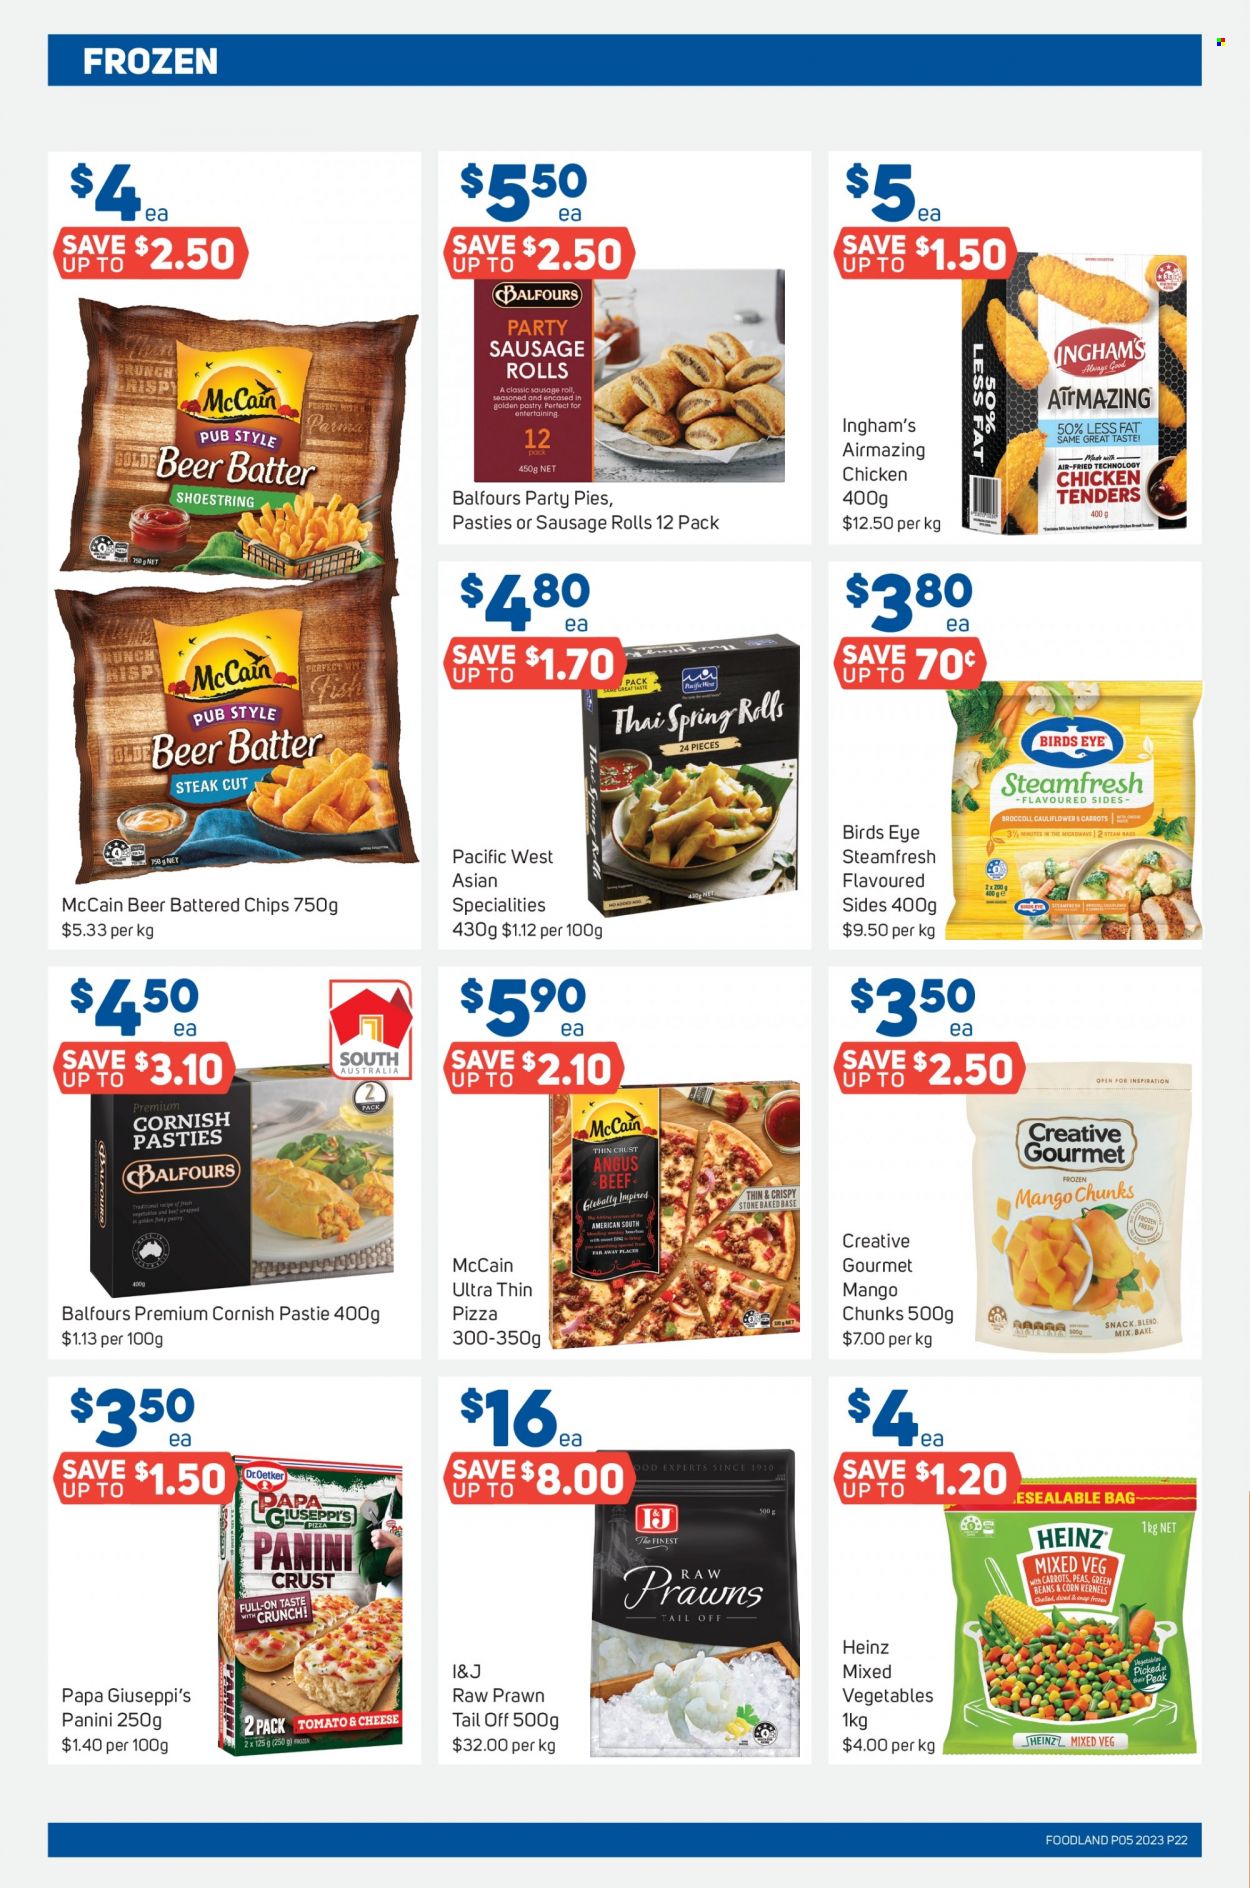 thumbnail - Foodland Catalogue - 1 Feb 2023 - 7 Feb 2023 - Sales products - sausage rolls, panini, beans, broccoli, corn, green beans, prawns, fish, pizza, chicken tenders, spring rolls, Bird's Eye, sausage, Dr. Oetker, mixed vegetables, McCain, snack, Heinz, beer, beef meat, steak, far away, bag. Page 22.